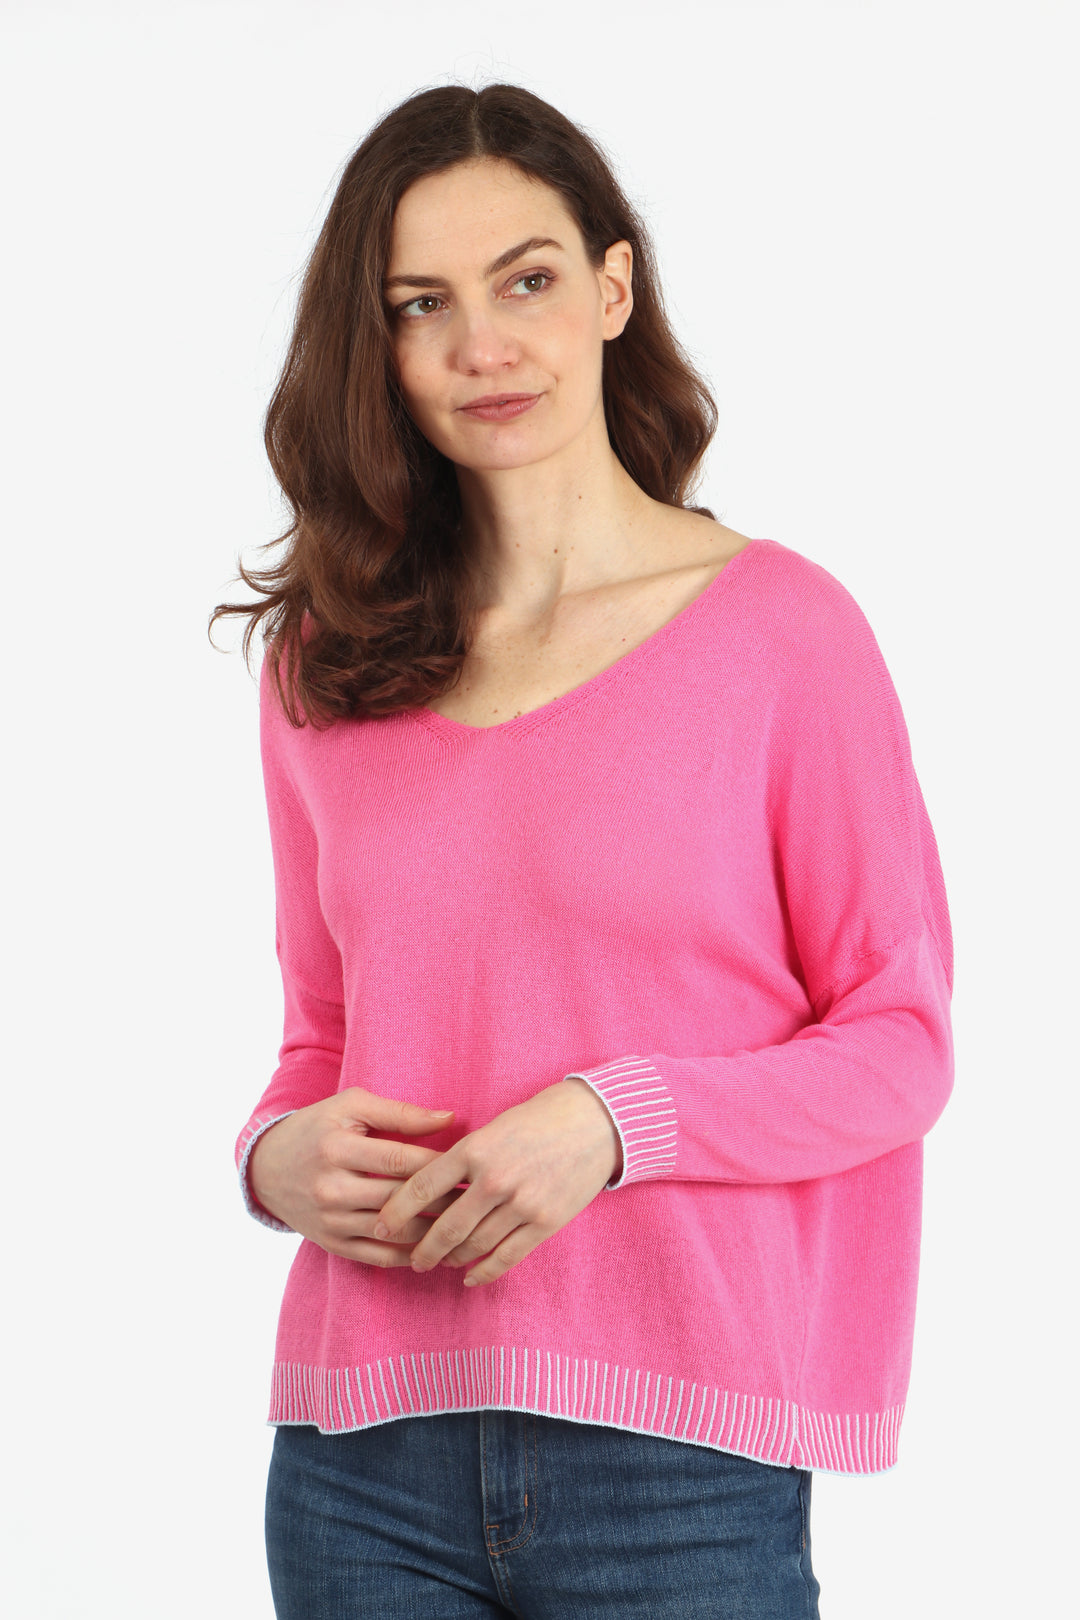 model wearing a pink v neck knitted cotton jumper with contrasting light blue stitching along the bottom edge and cuffs